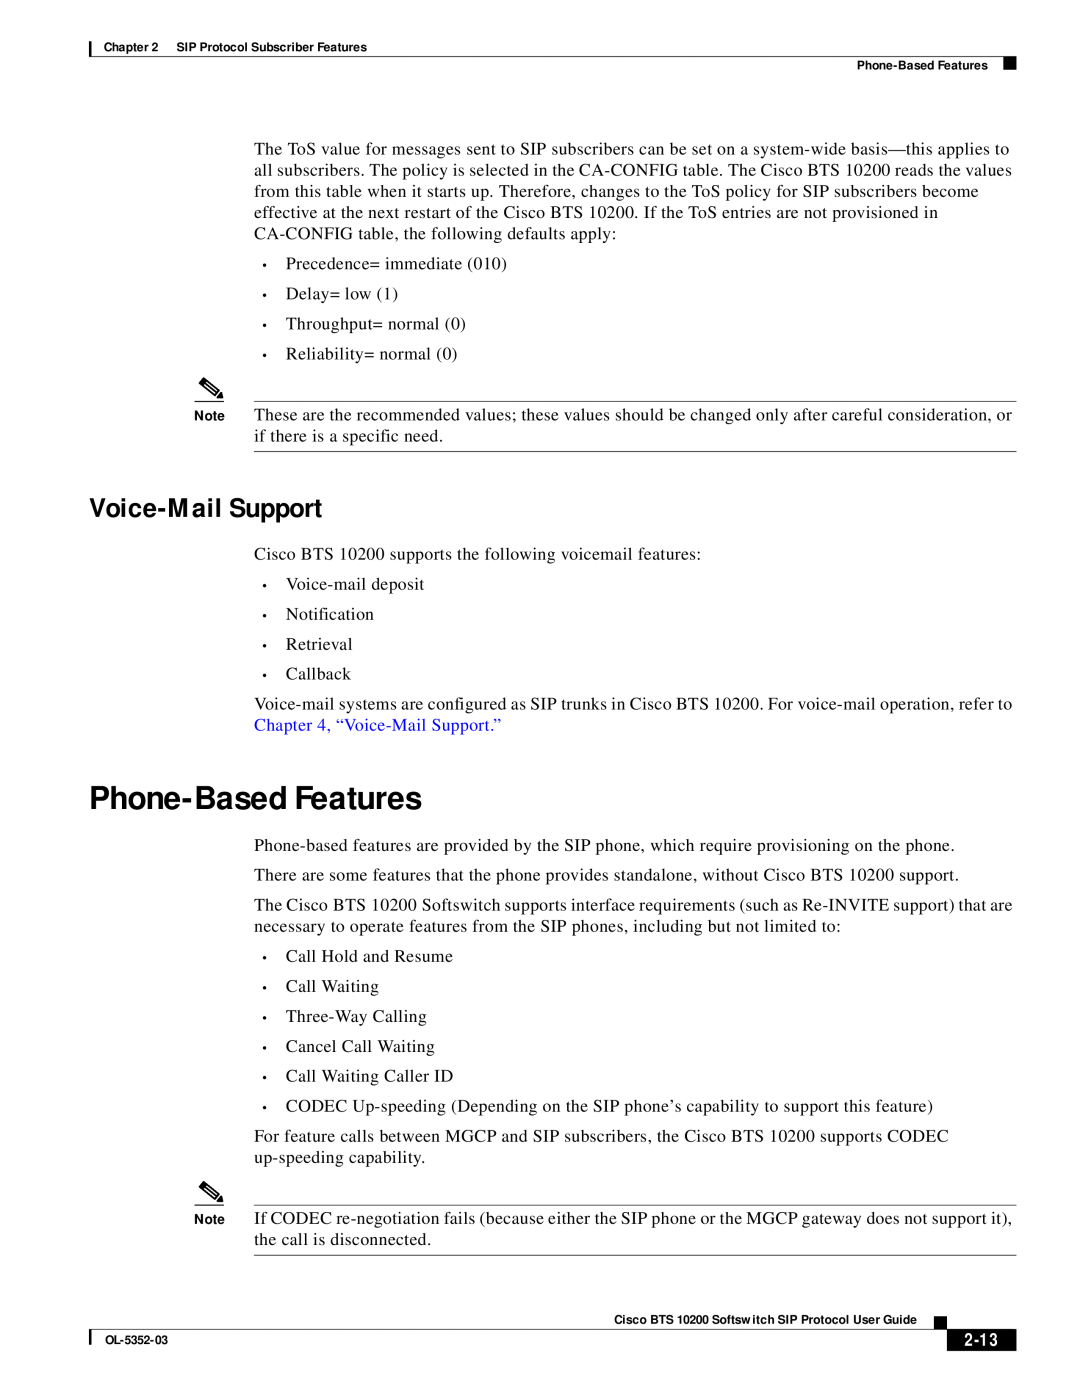 Cisco Systems BTS 10200 manual Phone-Based Features, Voice-Mail Support, 2-13 